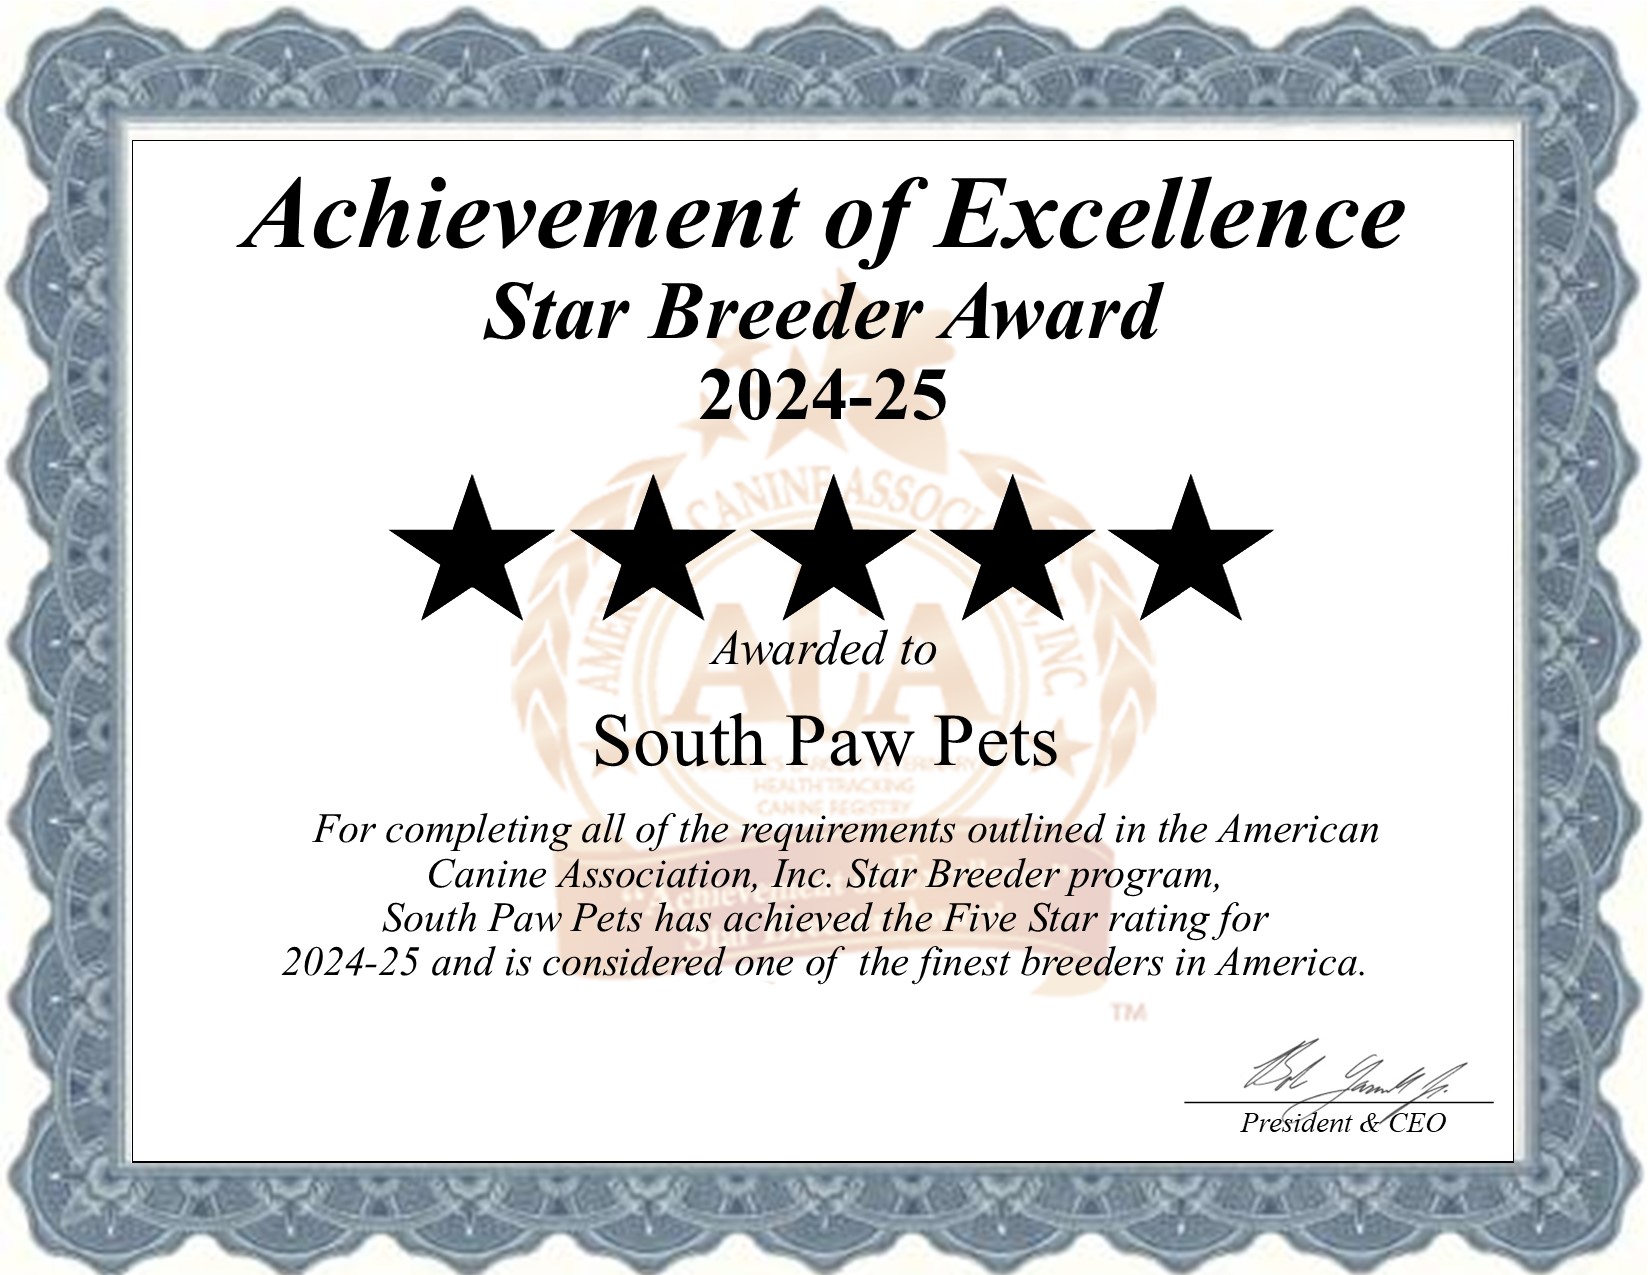 SouthPaw, Pets, dog, breeder, star, certificate, SouthPaw-Pets, Neosho, MO, Missouri, puppy, dog, kennels, mill, puppymill, usda, 5-star, aca, ica, registered, Cavachon